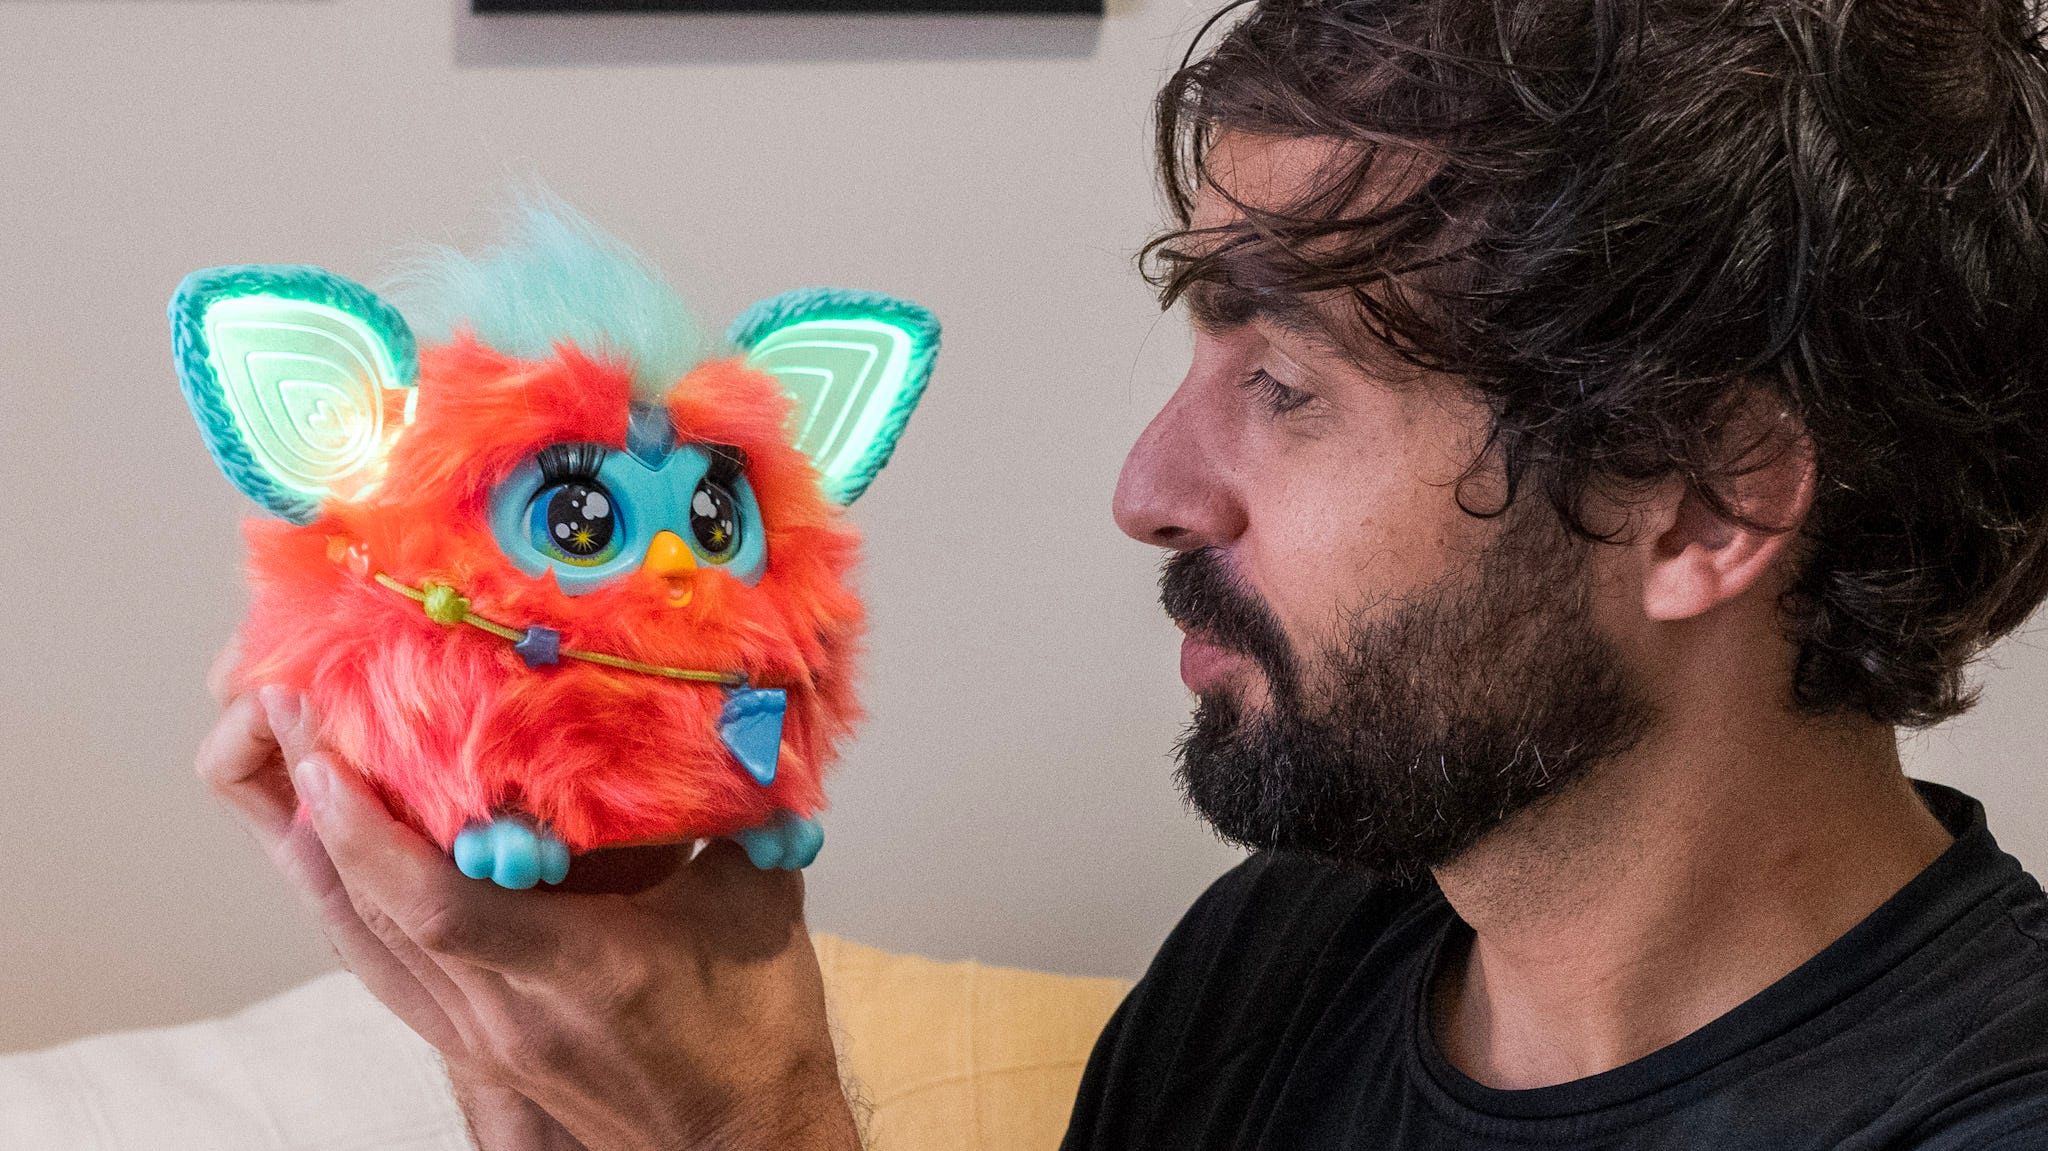 Furby - ROBOTS: Your Guide to the World of Robotics